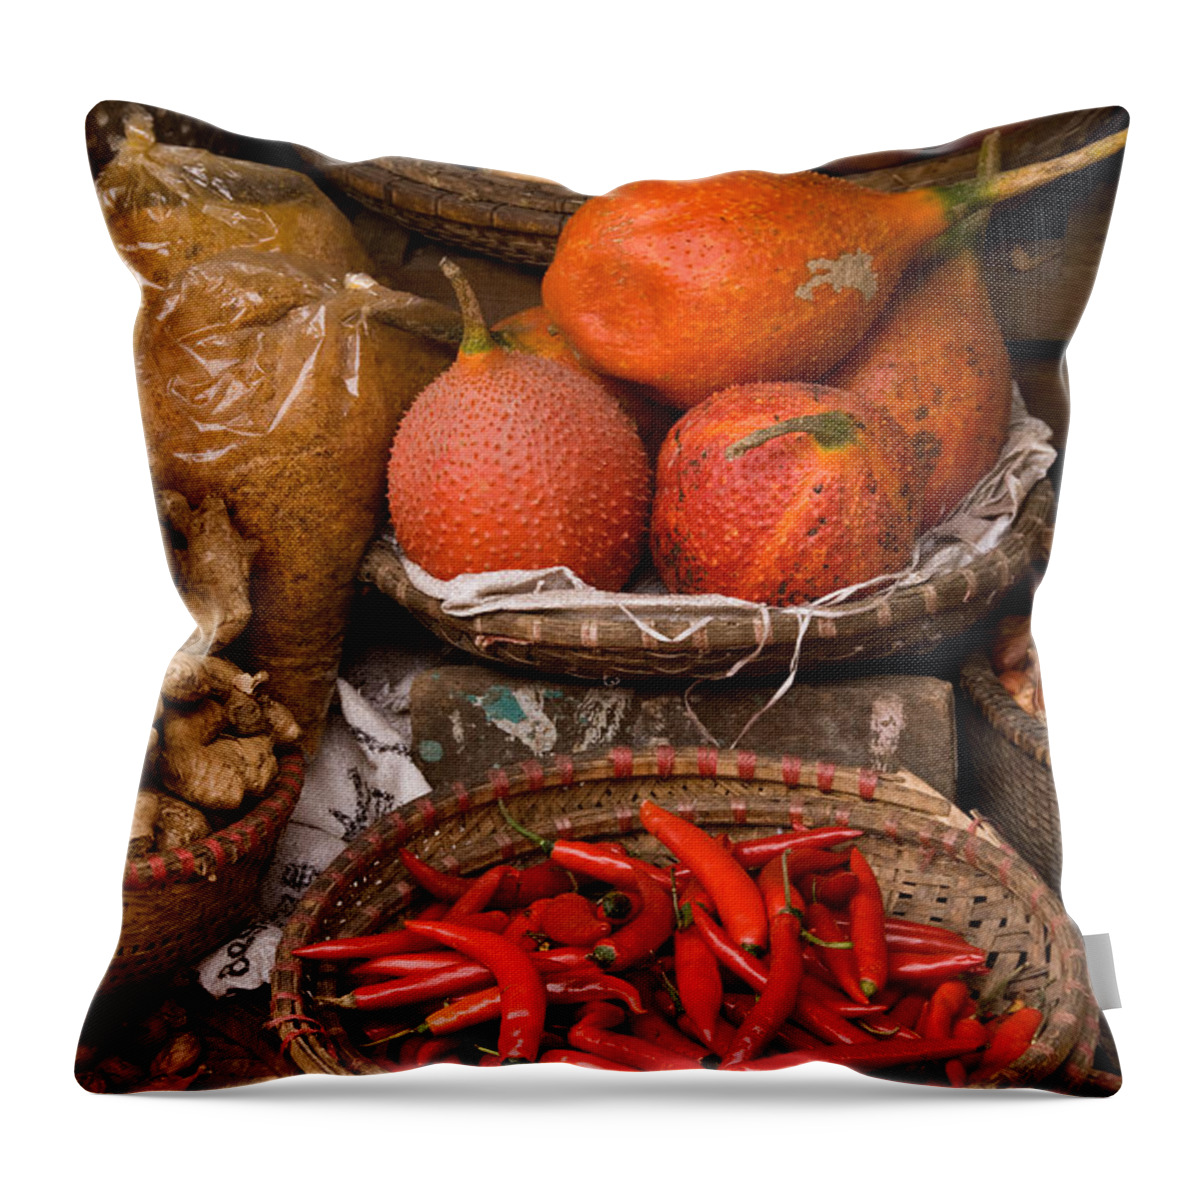 Basket Throw Pillow featuring the photograph Gac Fruit 02 by Rick Piper Photography